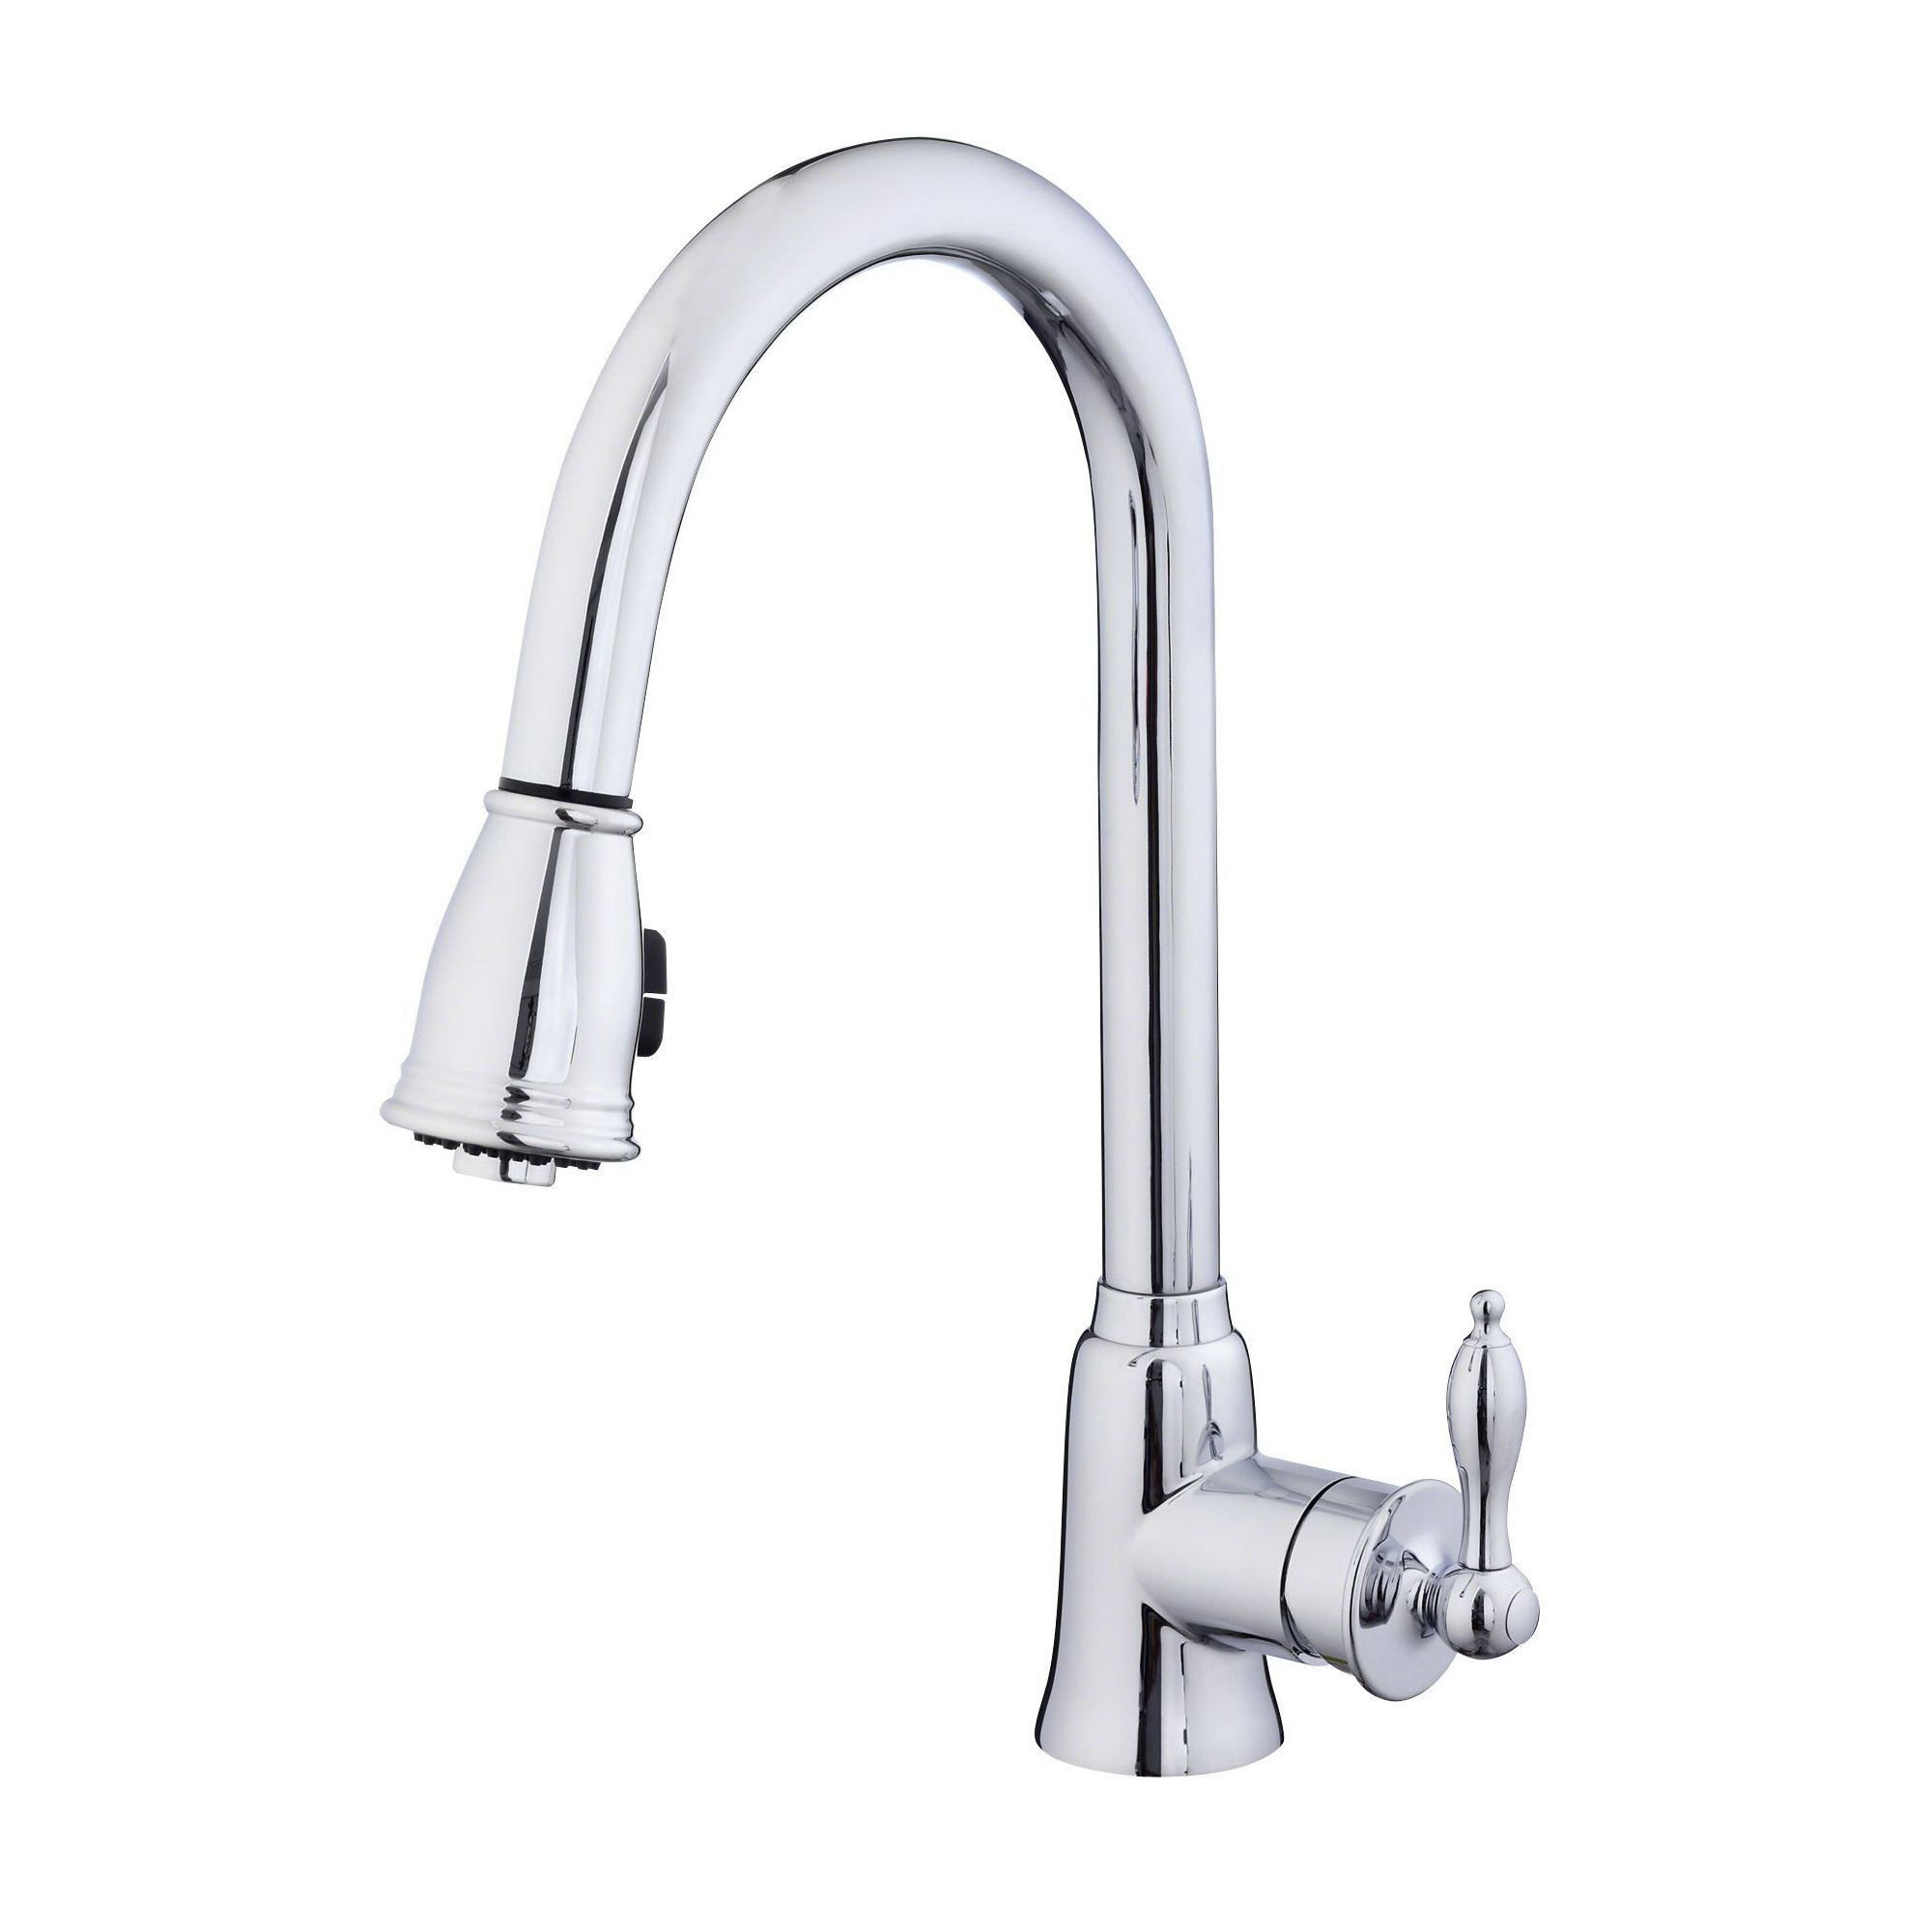 Danze D454410 Pull Down Kitchen Faucet With SnapBack Retraction